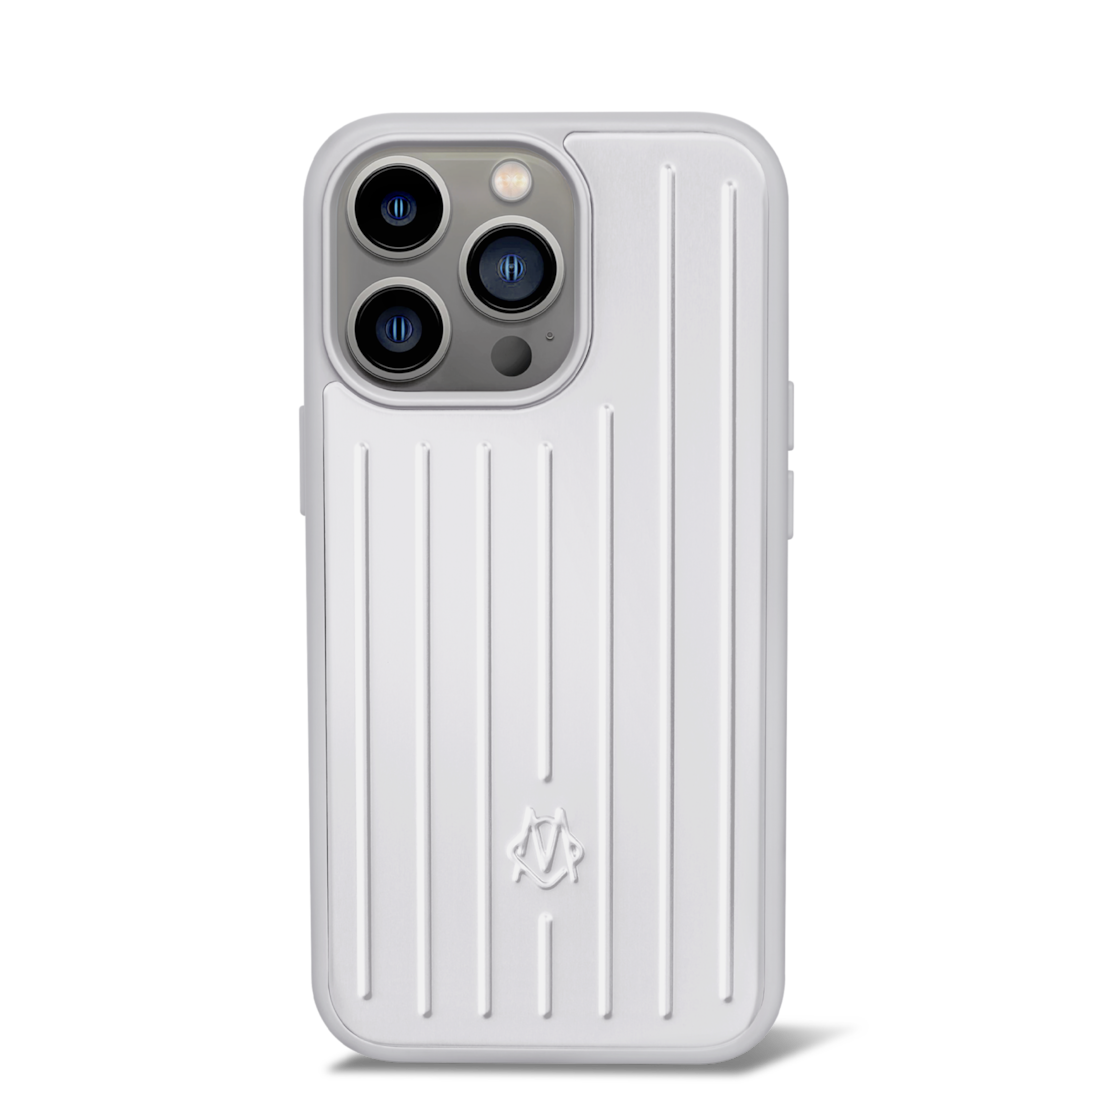 RIMOWA Launches iPhone 13 Pro and Pro Max Phone Covers - BagAddicts  Anonymous